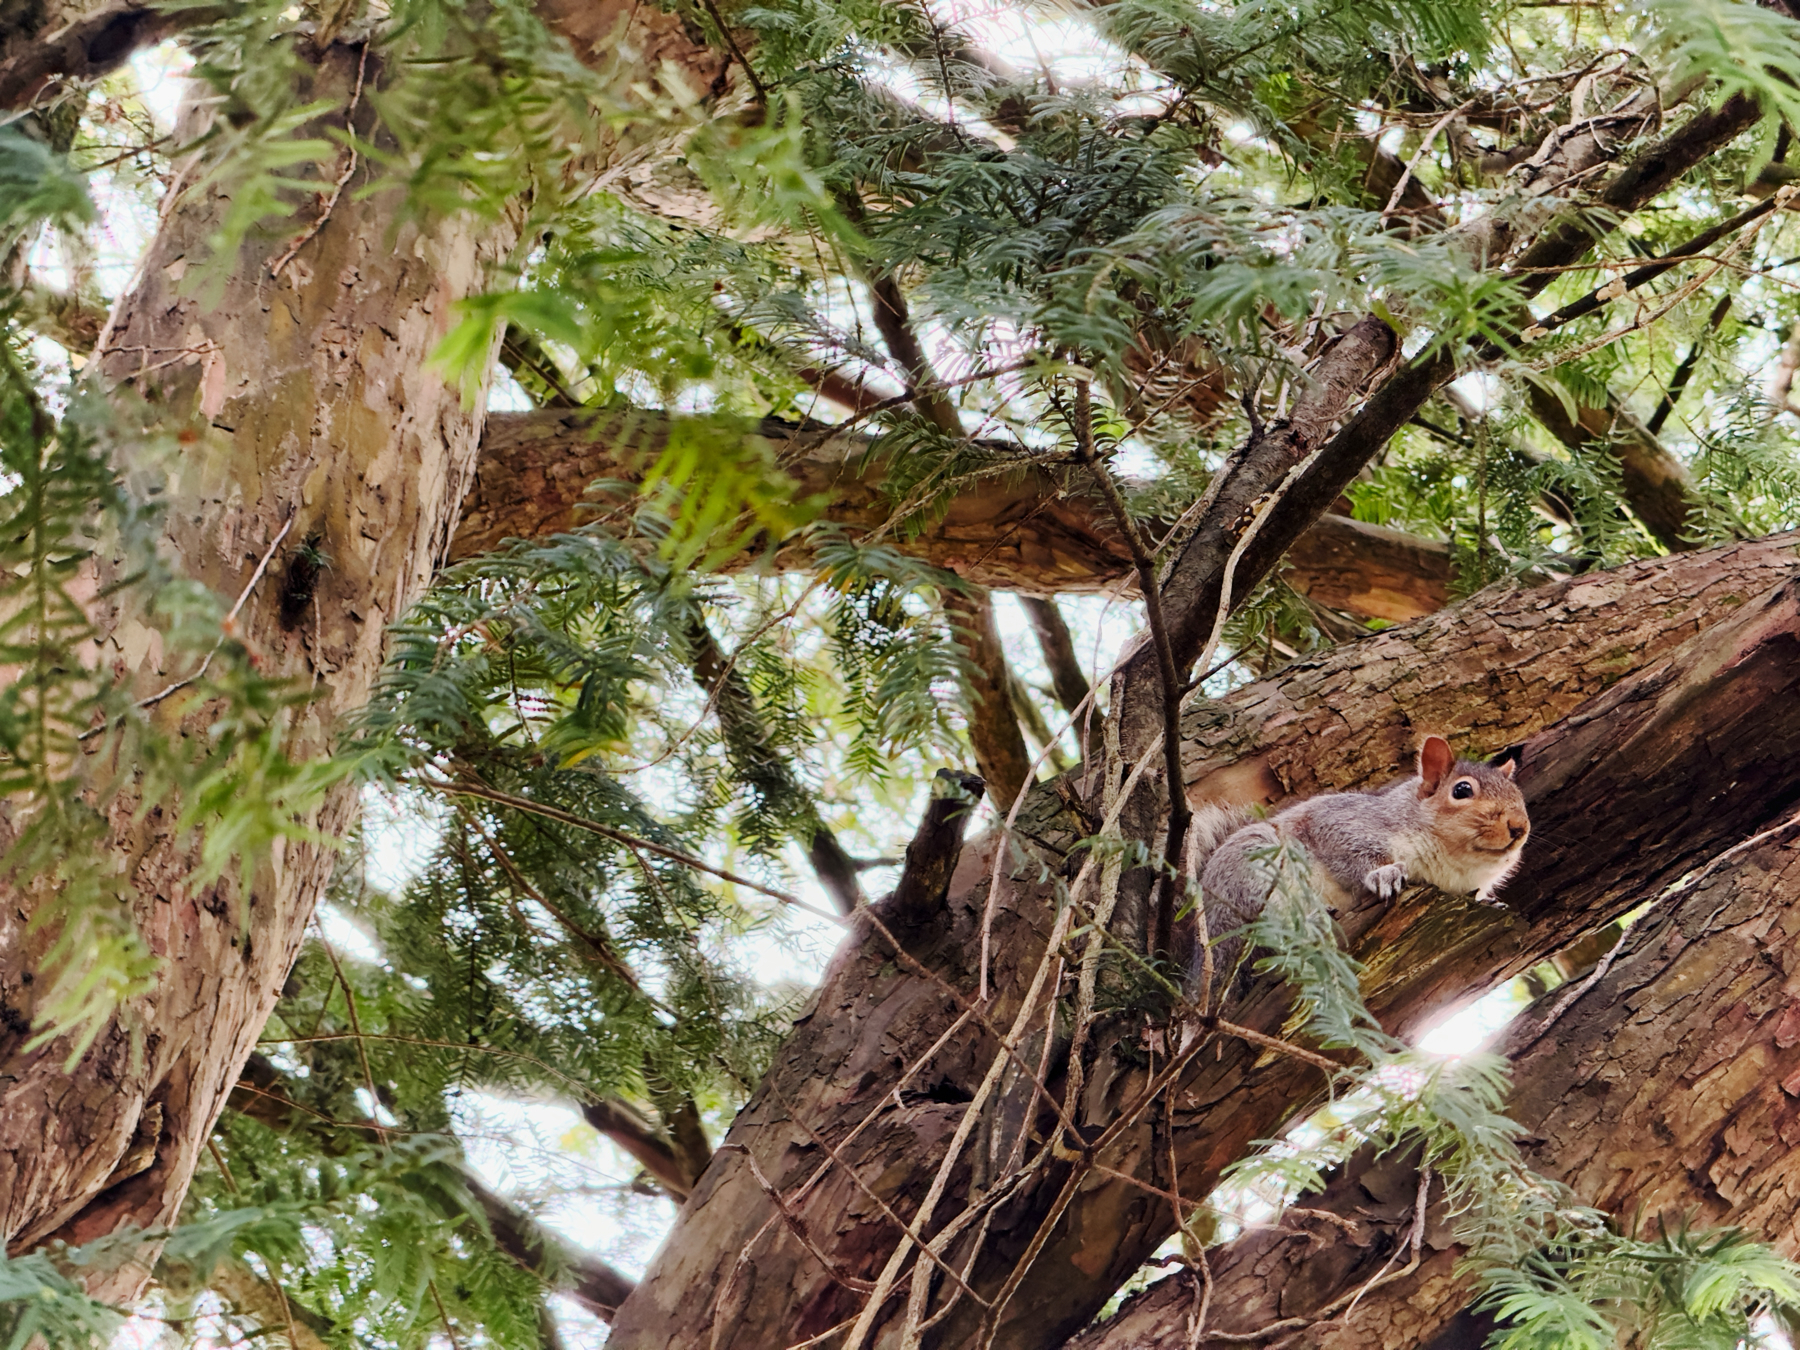 A squirrel perched on a tree branch surrounded by green foliage.